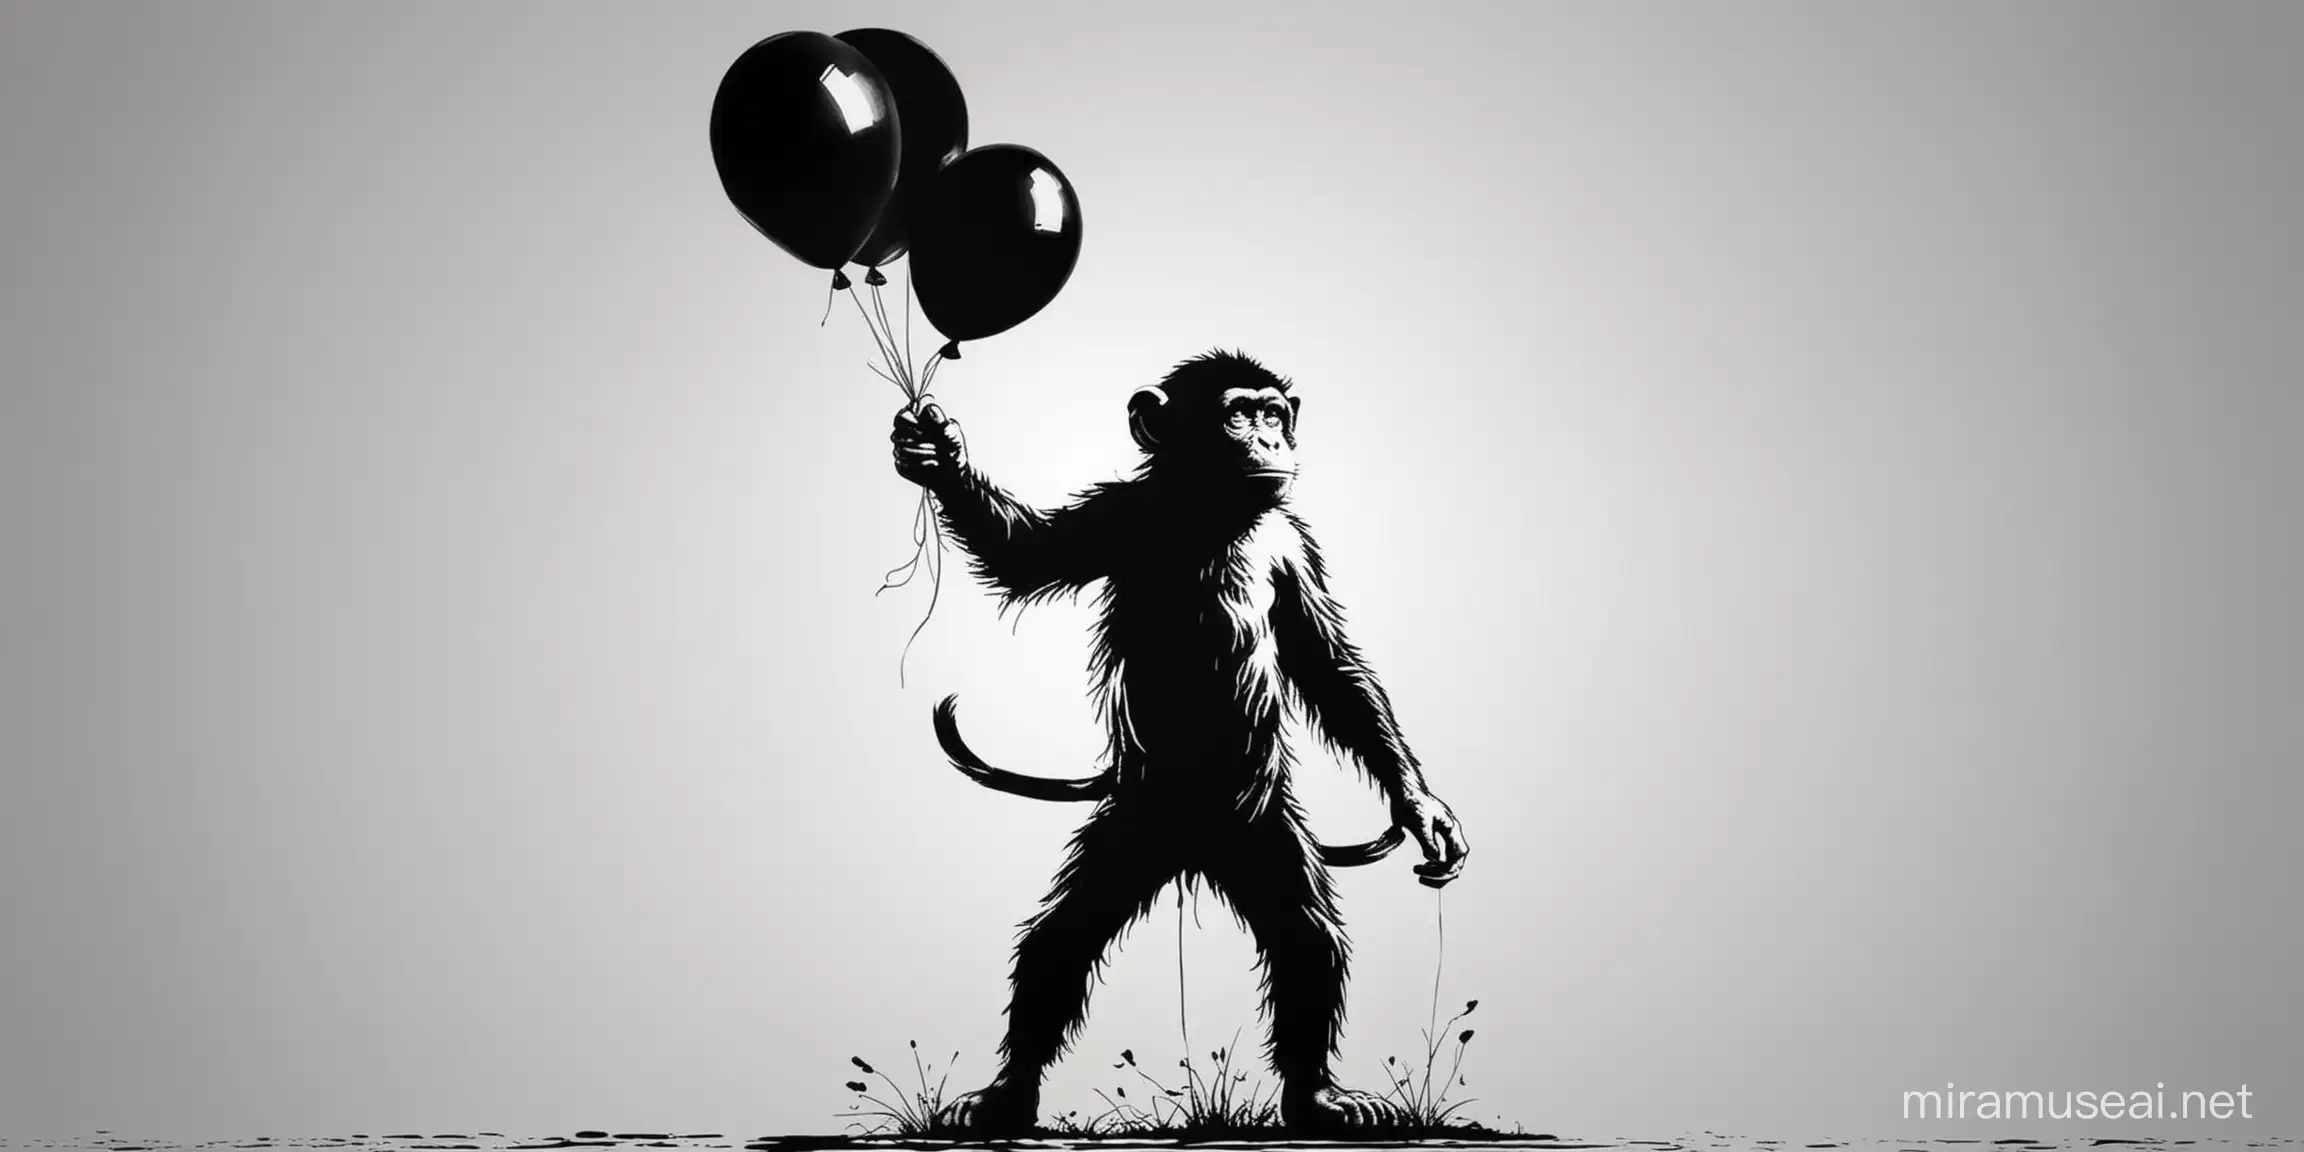 banksy style silhouette of monkey holding balloon. banksy style, black silhouette with white background